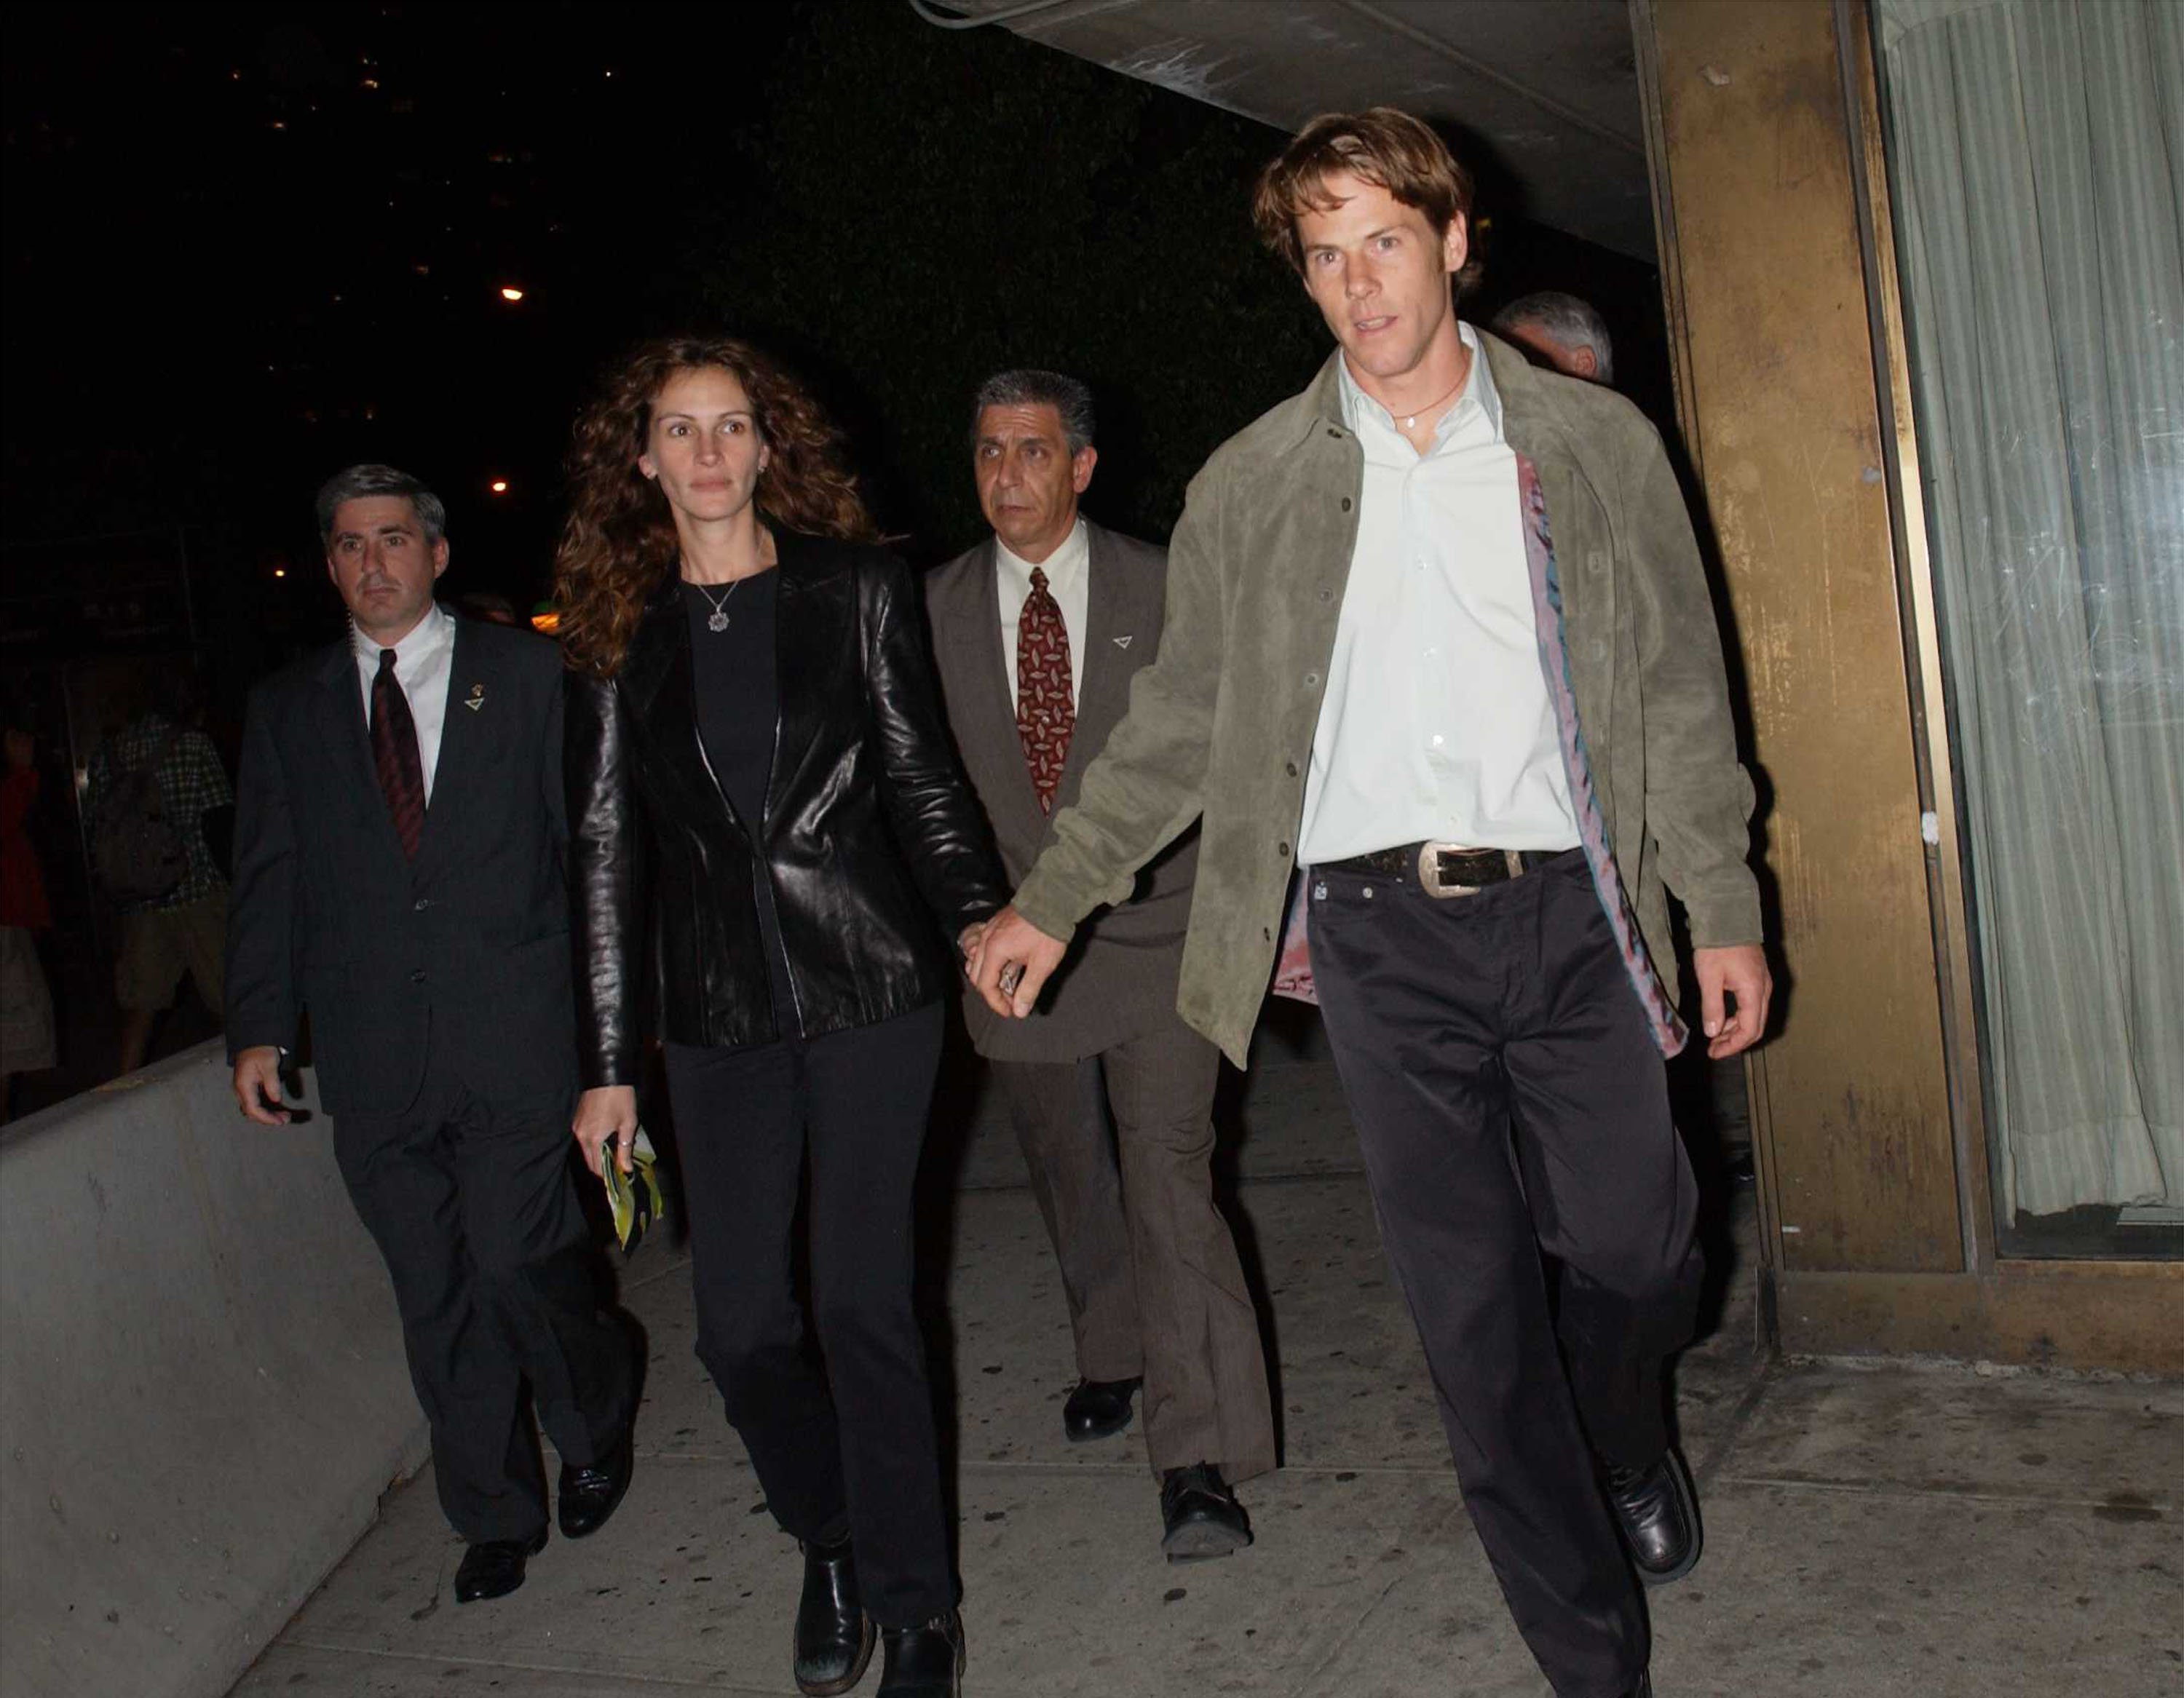 Julia Roberts and Danny Moder spotted leaving the screening of "Punch-Drunk Love" at Alice Tully Hall during the 10th Annual New York Film Festival October 5, 2002 in New York City, New York. / Source: Getty Images